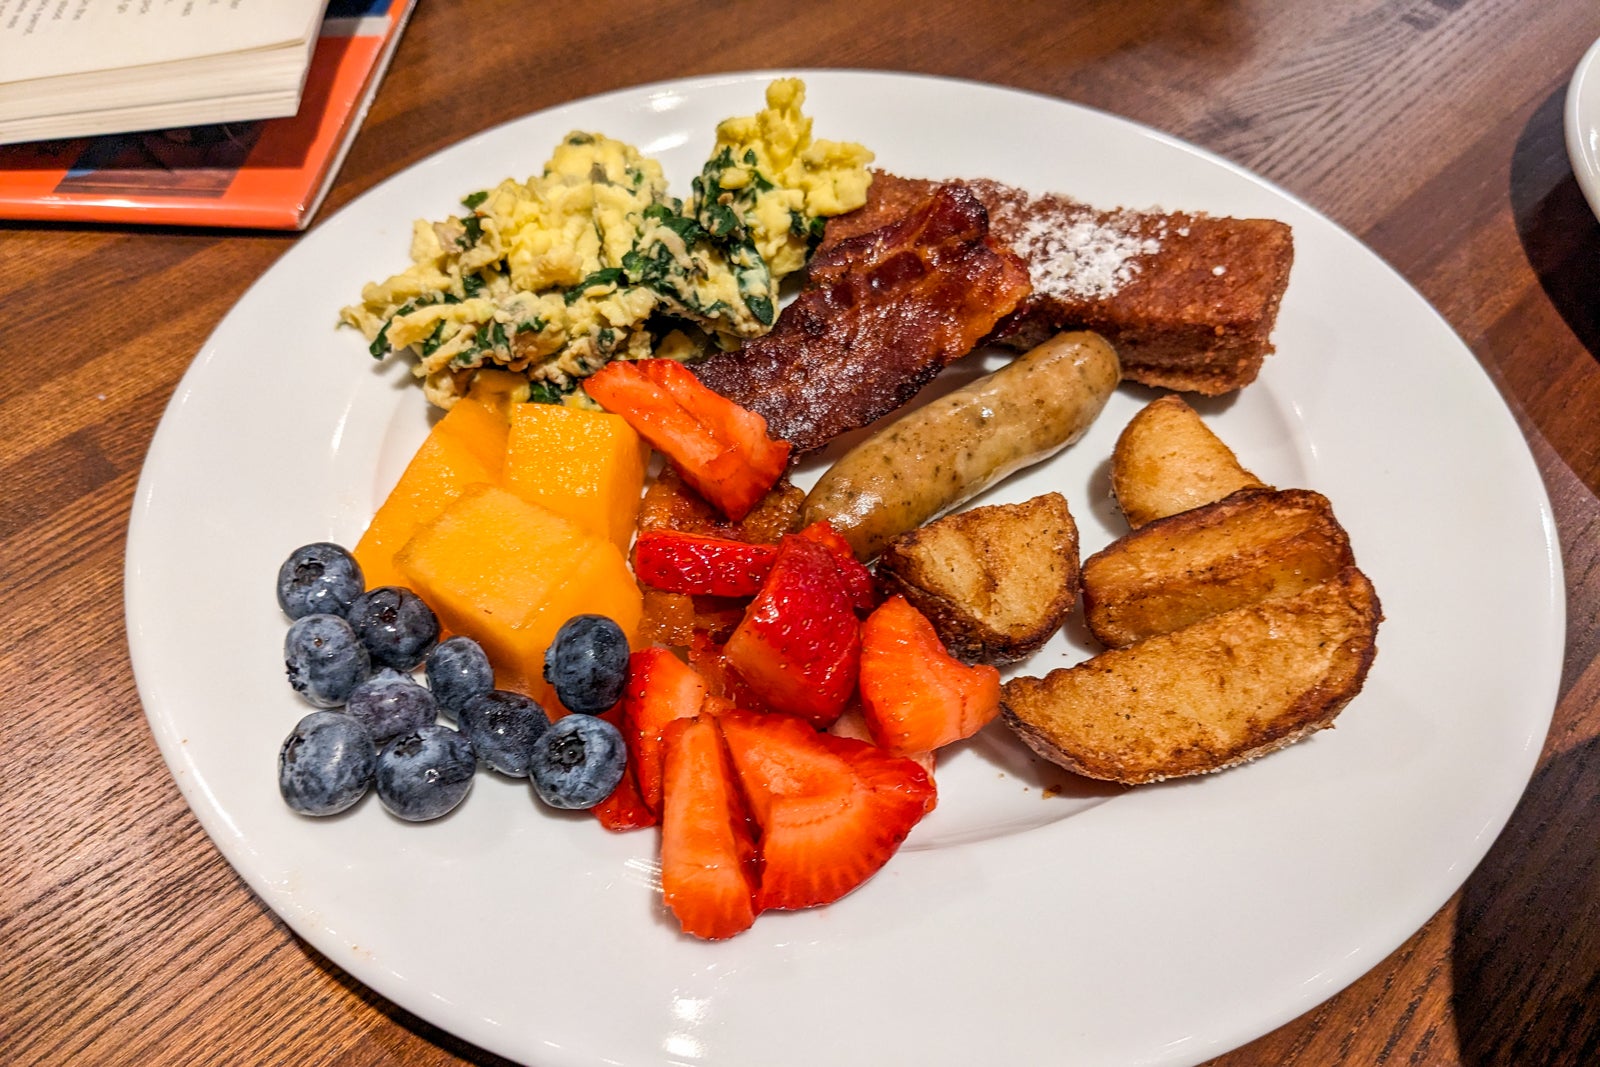 Plate of eggs, French toast, sausage, fruit and breakfast potatoes